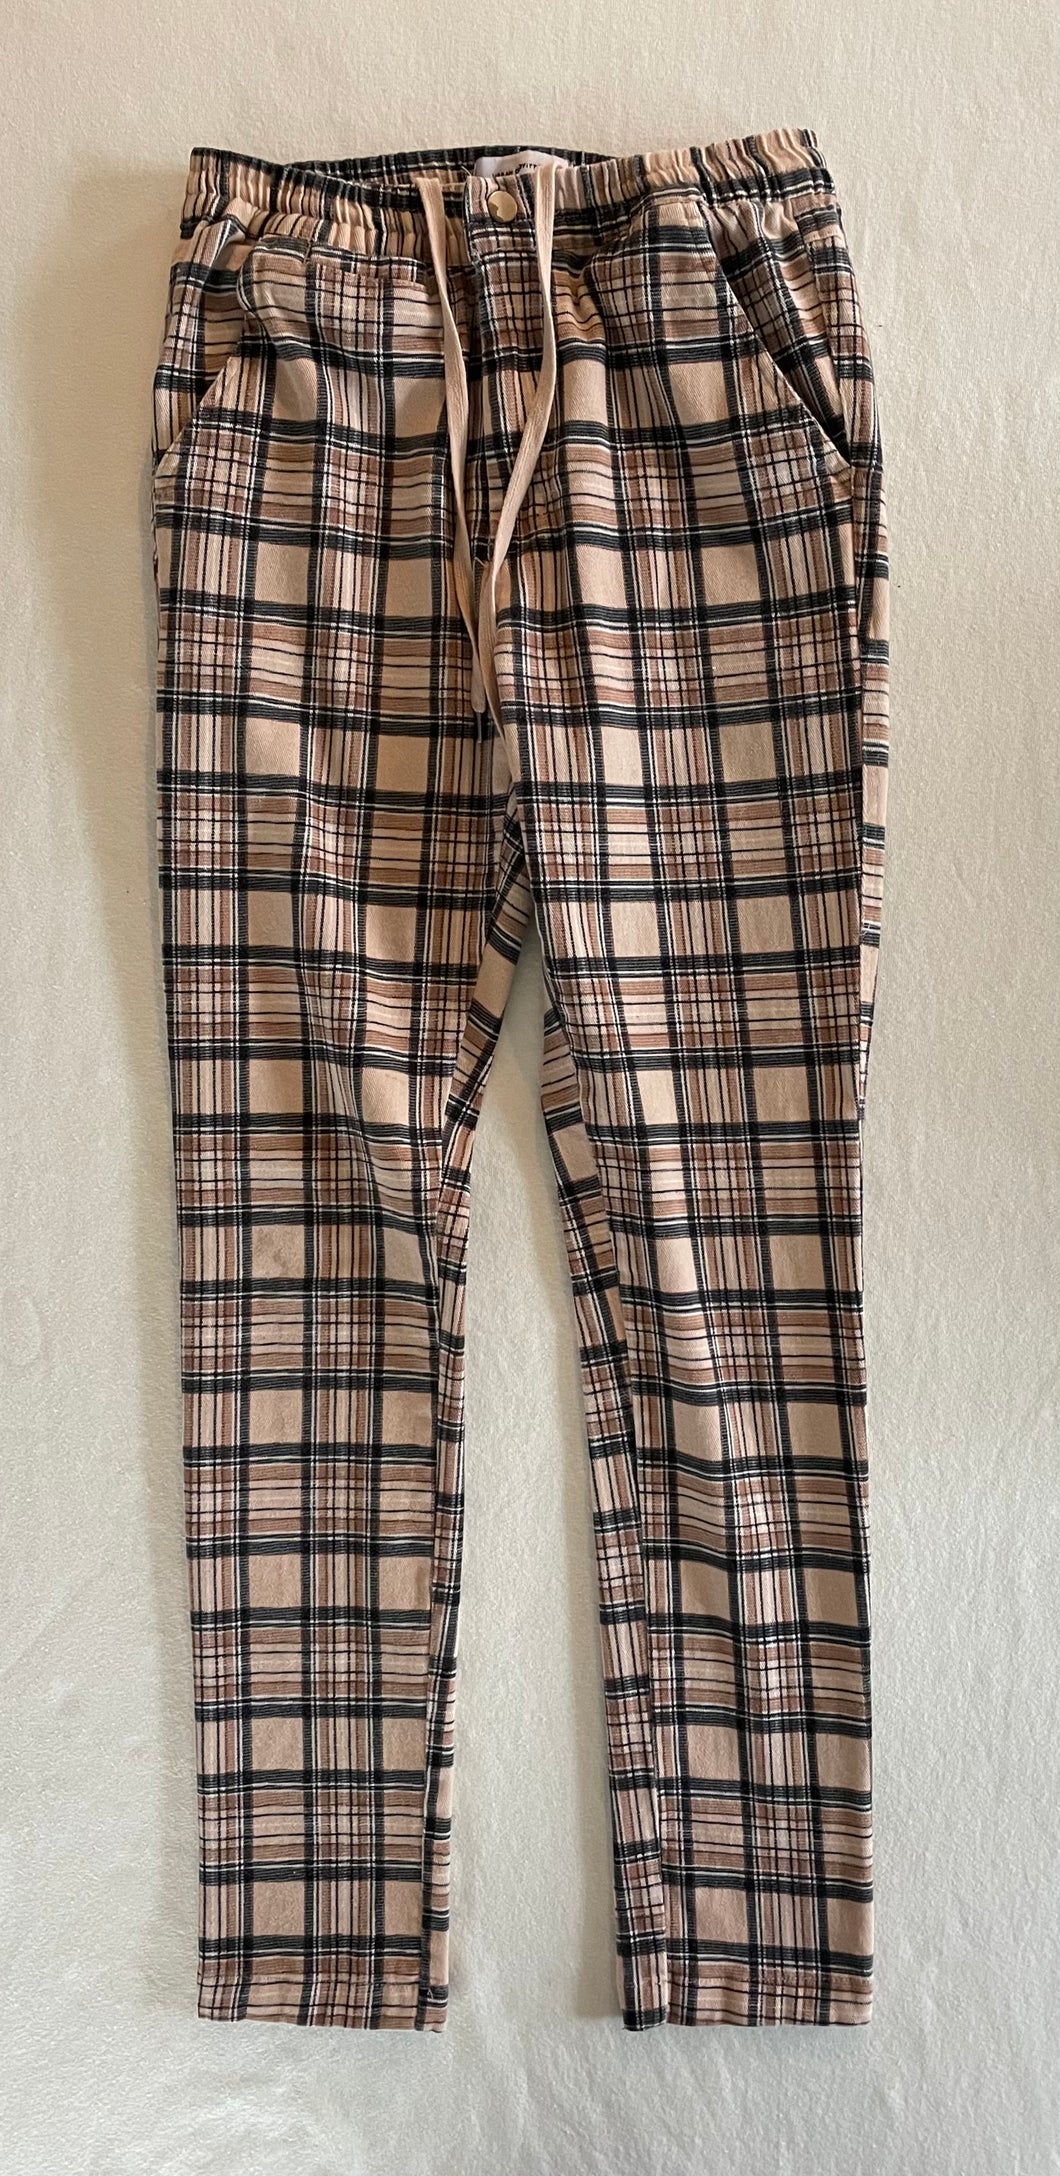 S Second hand ‘Urban Outfitters’ pants